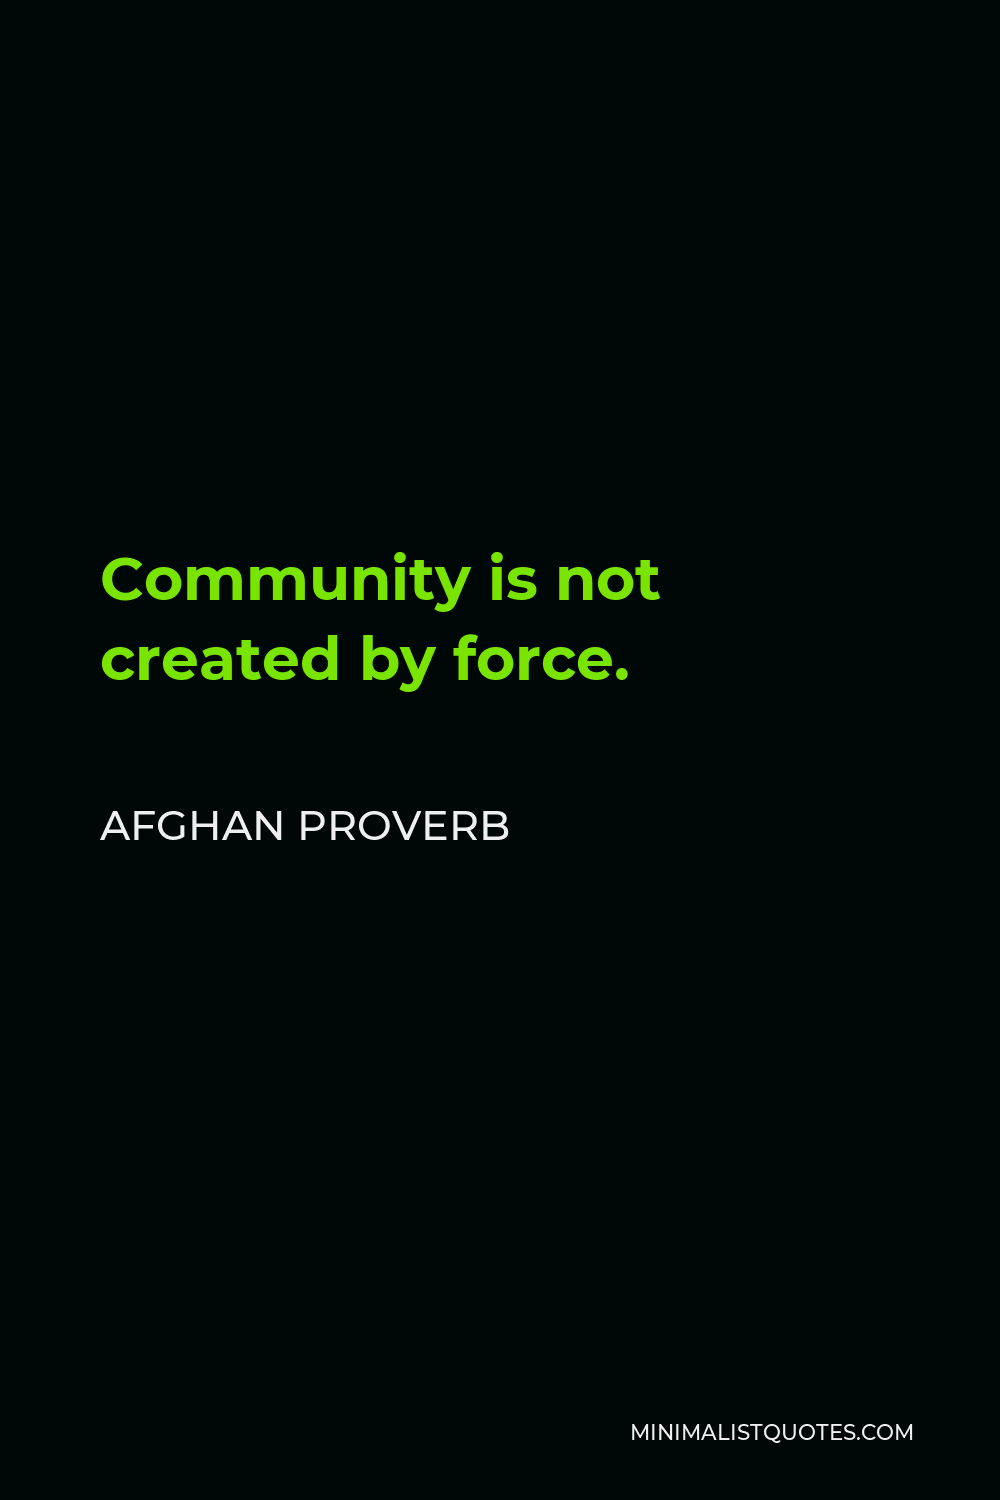 Afghan Proverb Quote - Community is not created by force.